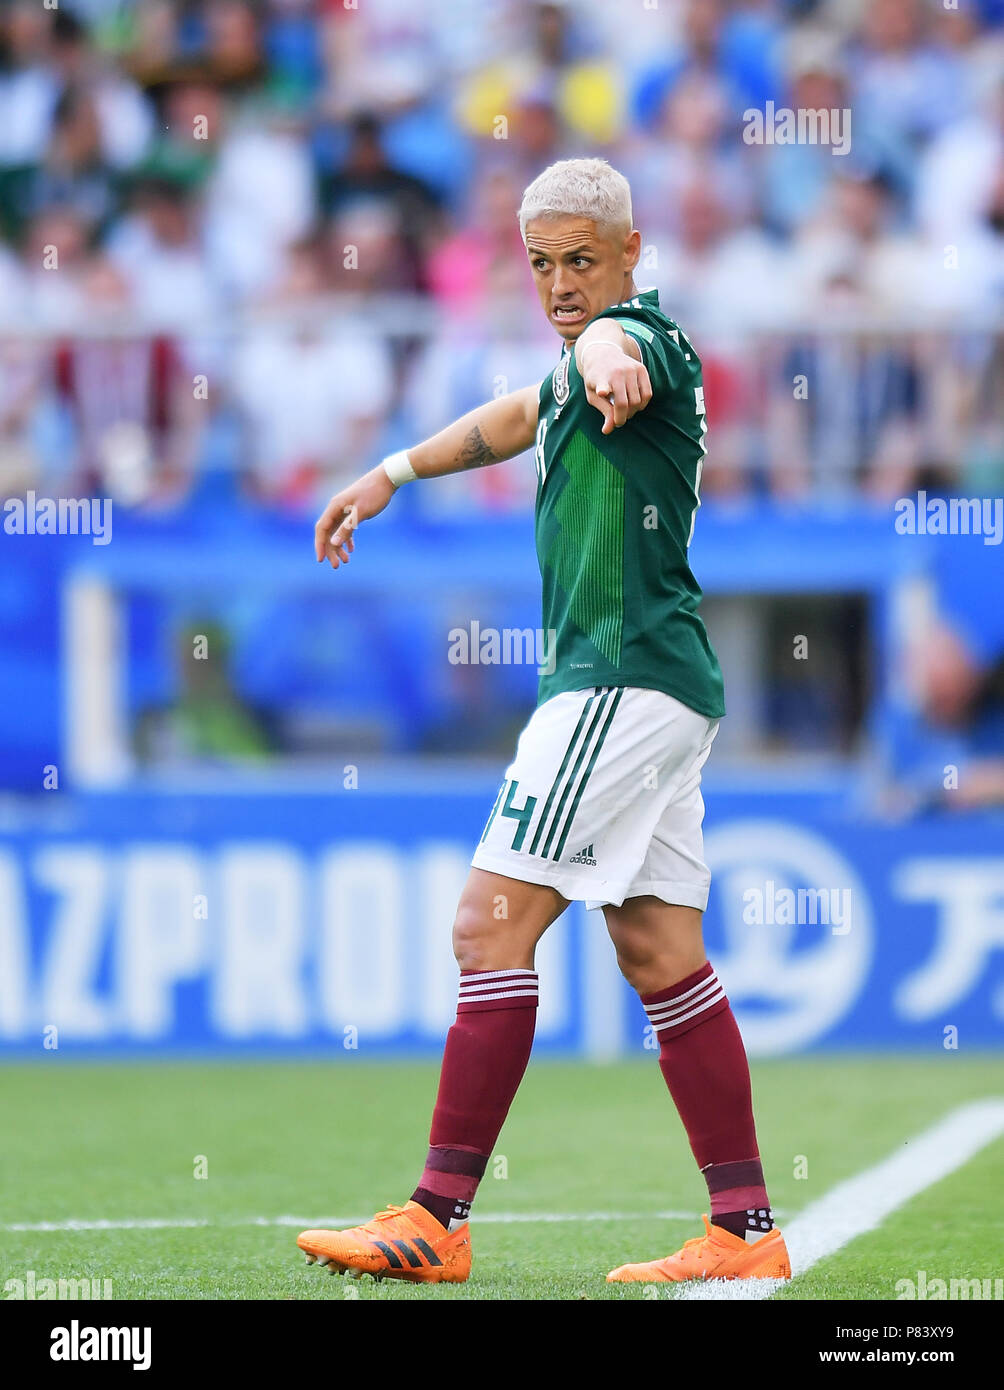 SAMARA, RUSSIA - JULY 02: Javier Hernandez of Mexico reacts during the 2018 FIFA World Cup Russia Round of 16 match between Brazil and Mexico at Samara Arena on July 2, 2018 in Samara, Russia. (Photo by Lukasz Laskowski/PressFocus/MB Media) Stock Photo